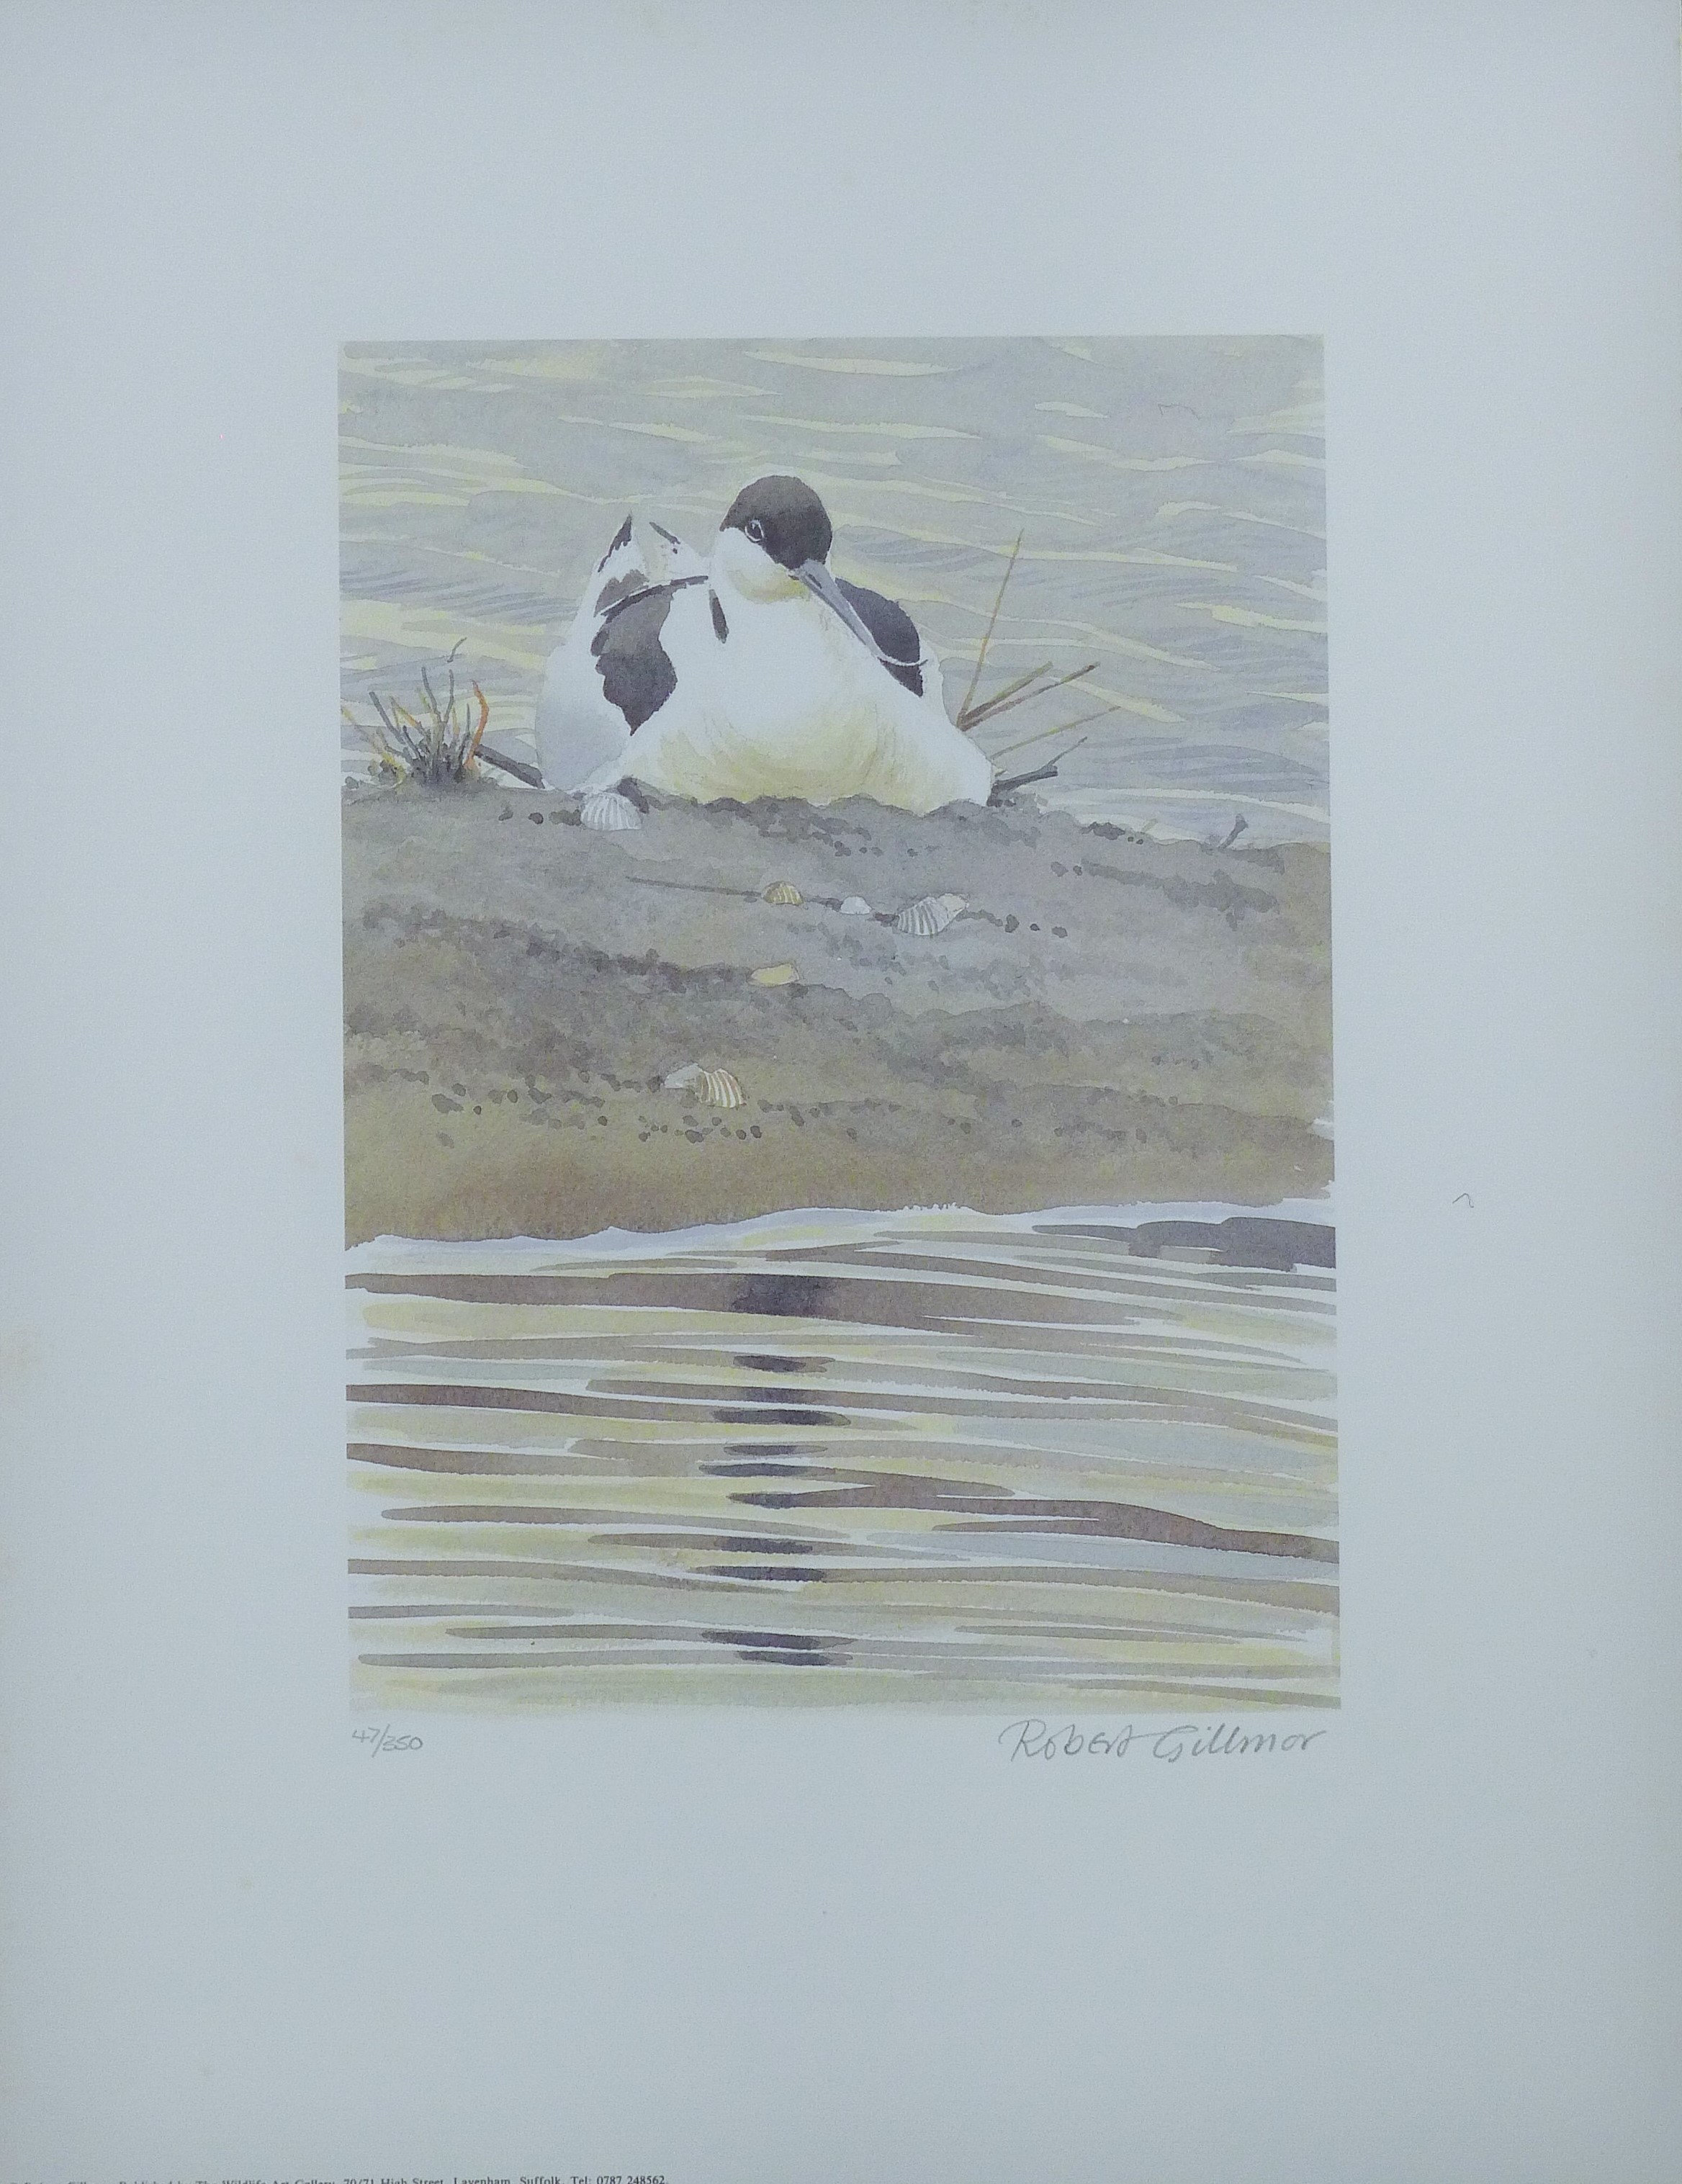 GILLMOR, ROBERT (1936-2022) British (AR), Brooding Avocet, print, signed and numbered 47 of 350, - Image 2 of 4